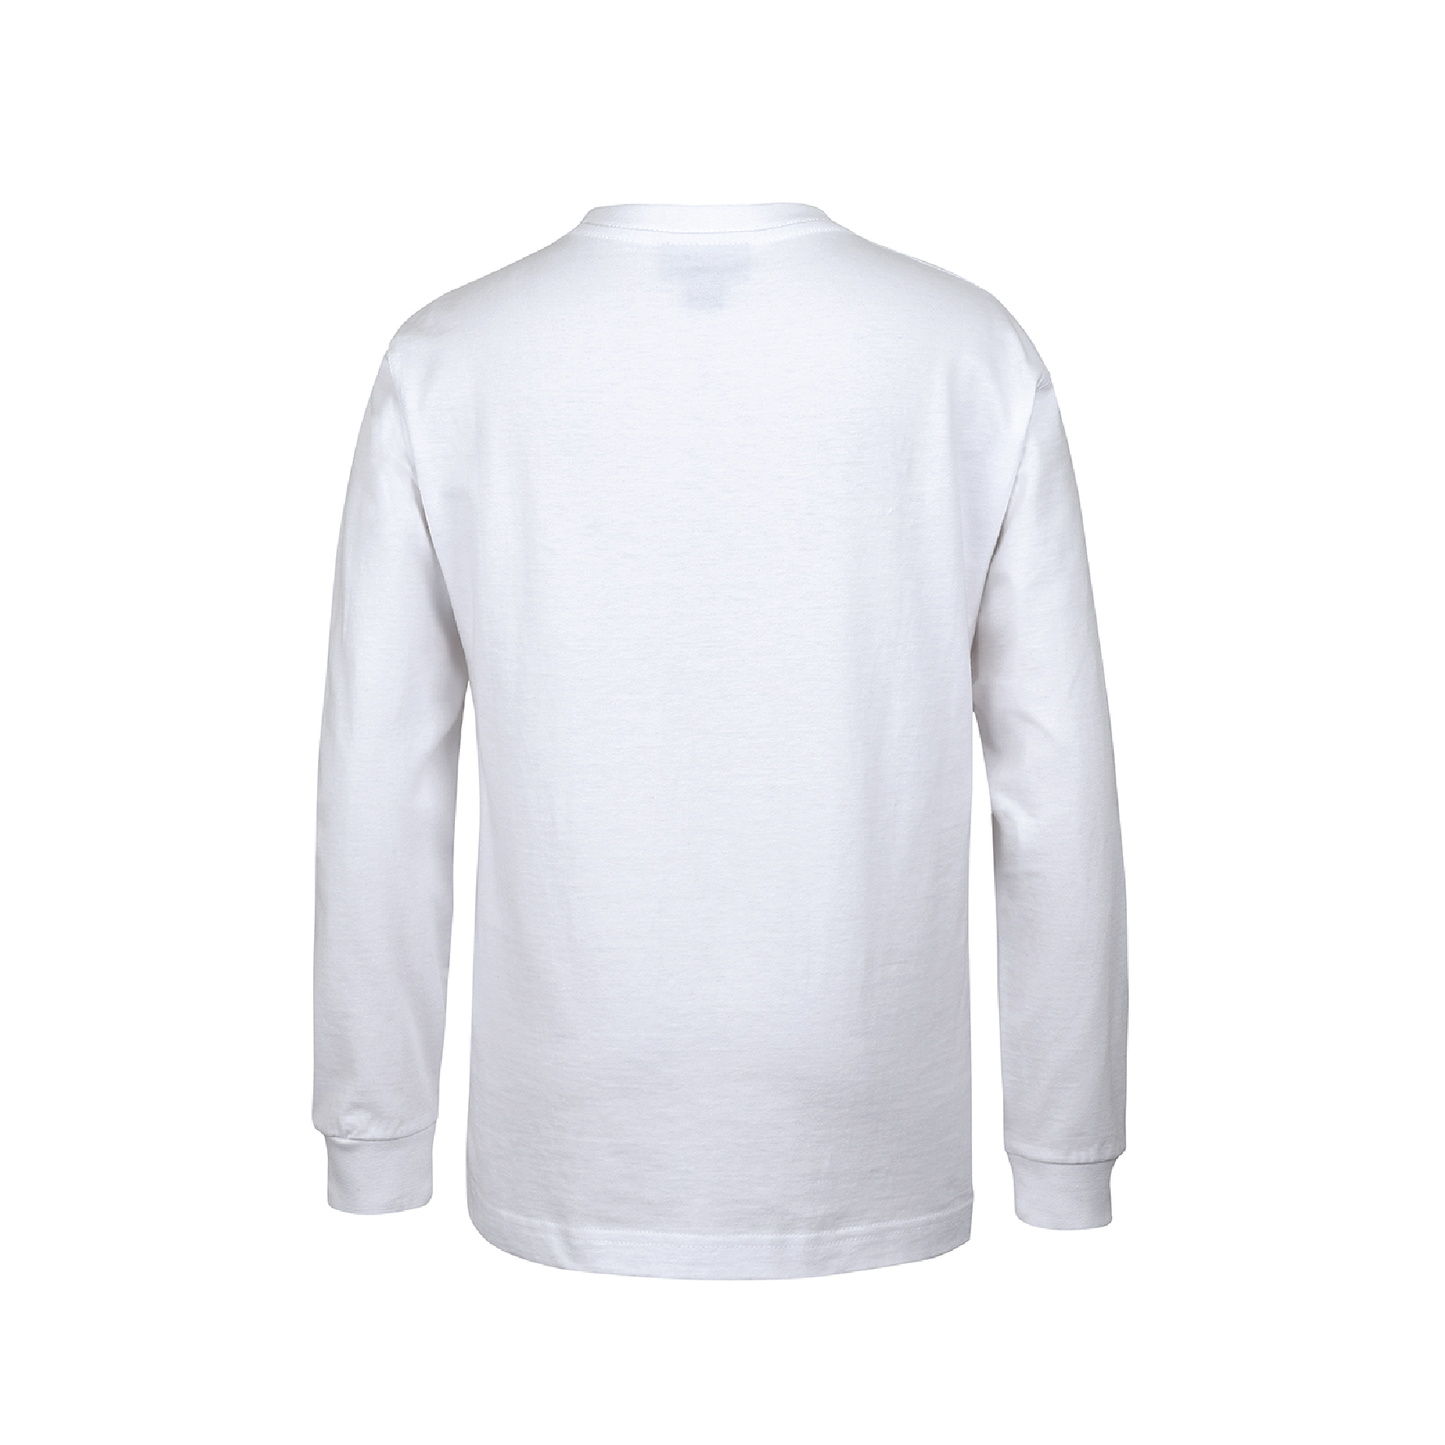 EASTER CLASSIC T-SHIRT WHITE LONG SLEEVE (available online only)